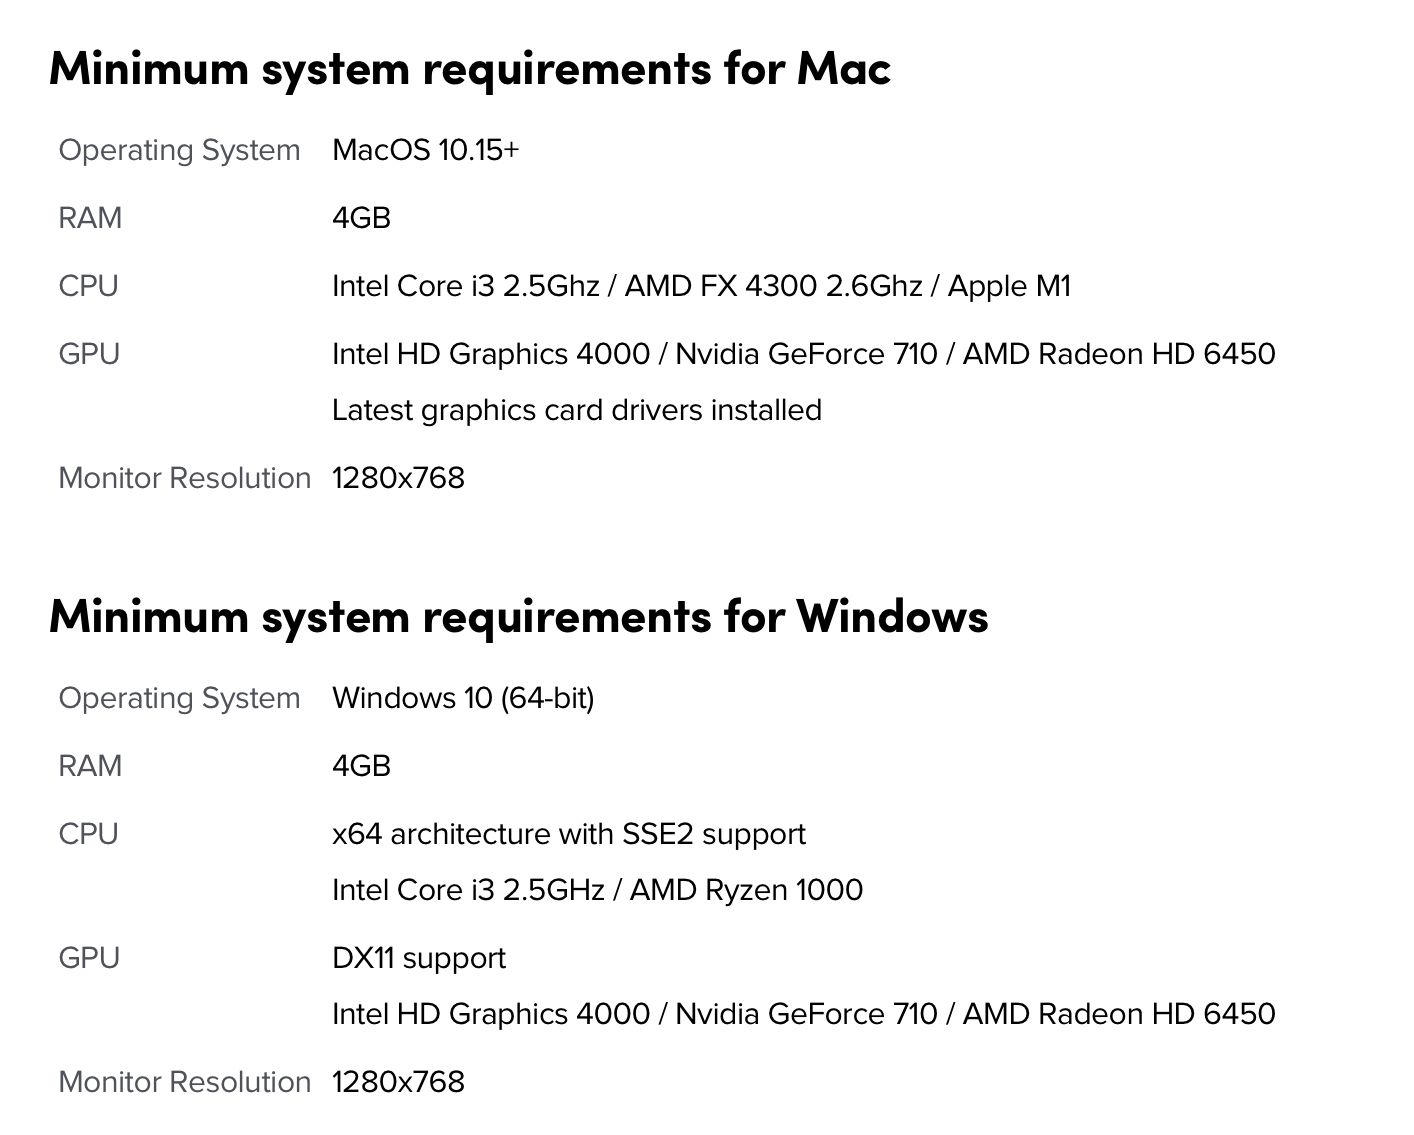 Minimum system requirements for Effect House on Mac and Windows